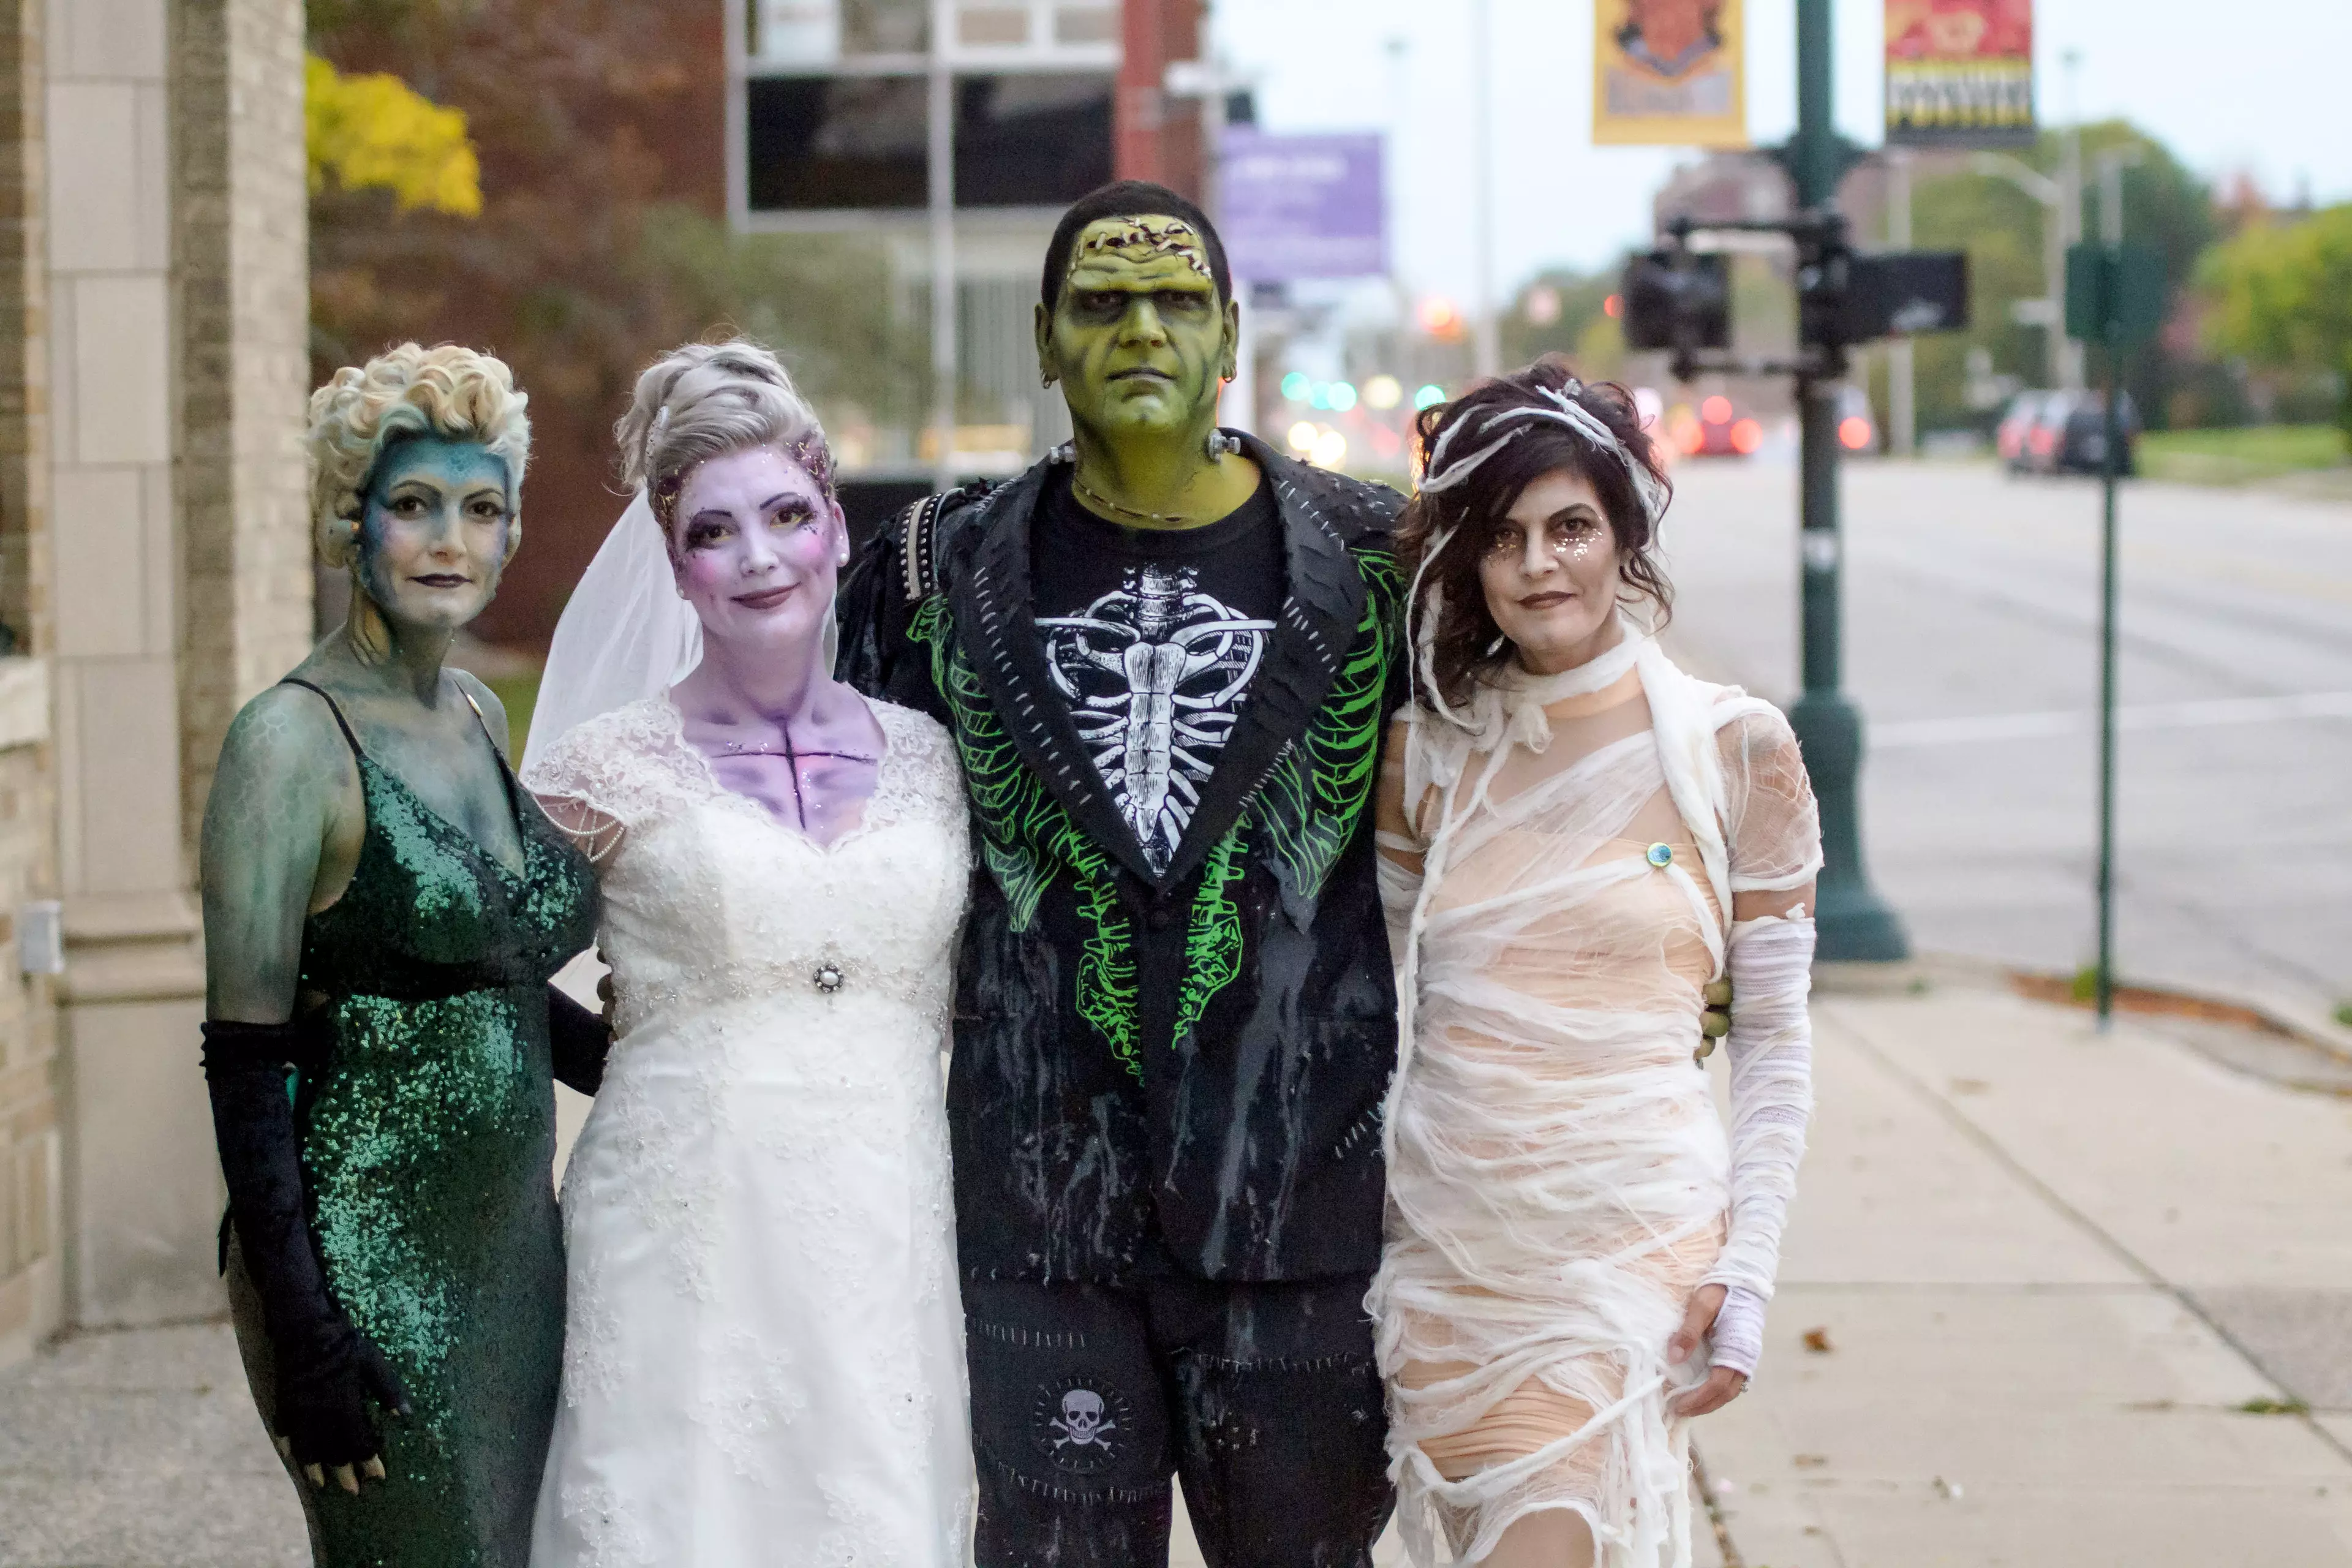 The bridesmaids were dressed as the Creature from the Black Lagoon and The Mummy. (